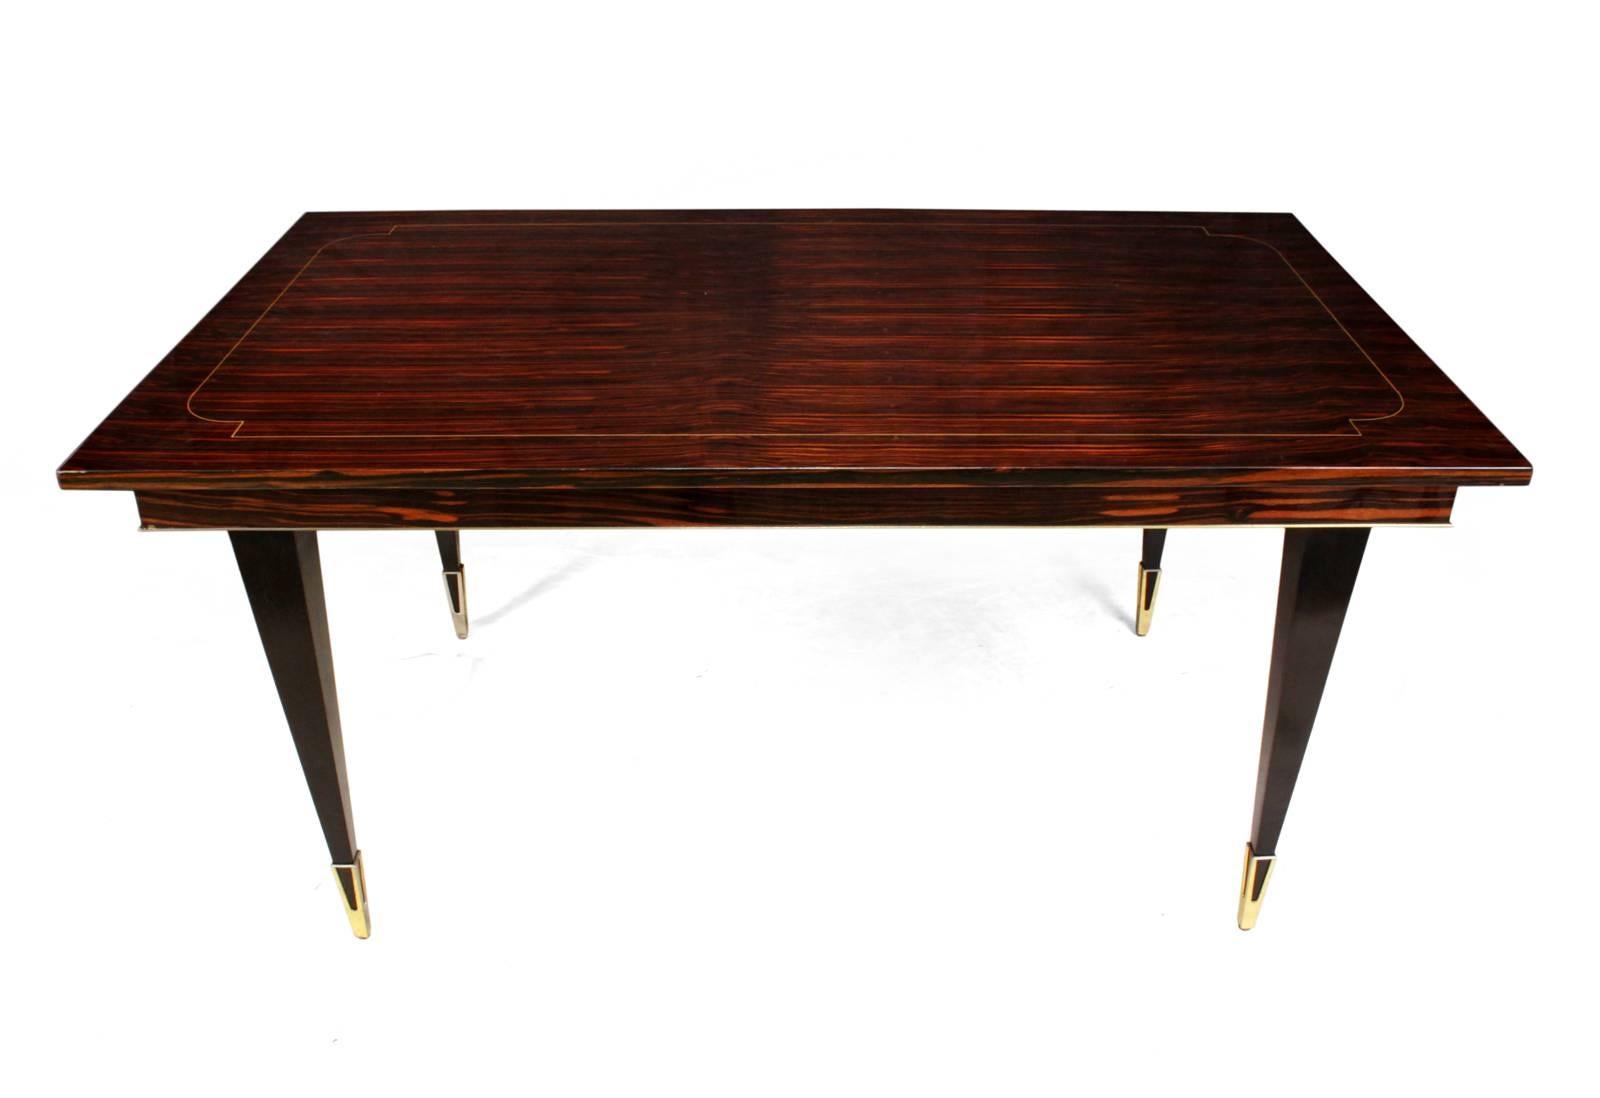 Midcentury Macassar ebony dining table
A midcentury dining table produced in France in the mid-1950s. With Macassar ebony with fine line inlay and adjustable brass feet, there are two extension leaves

the table is still in its original thick